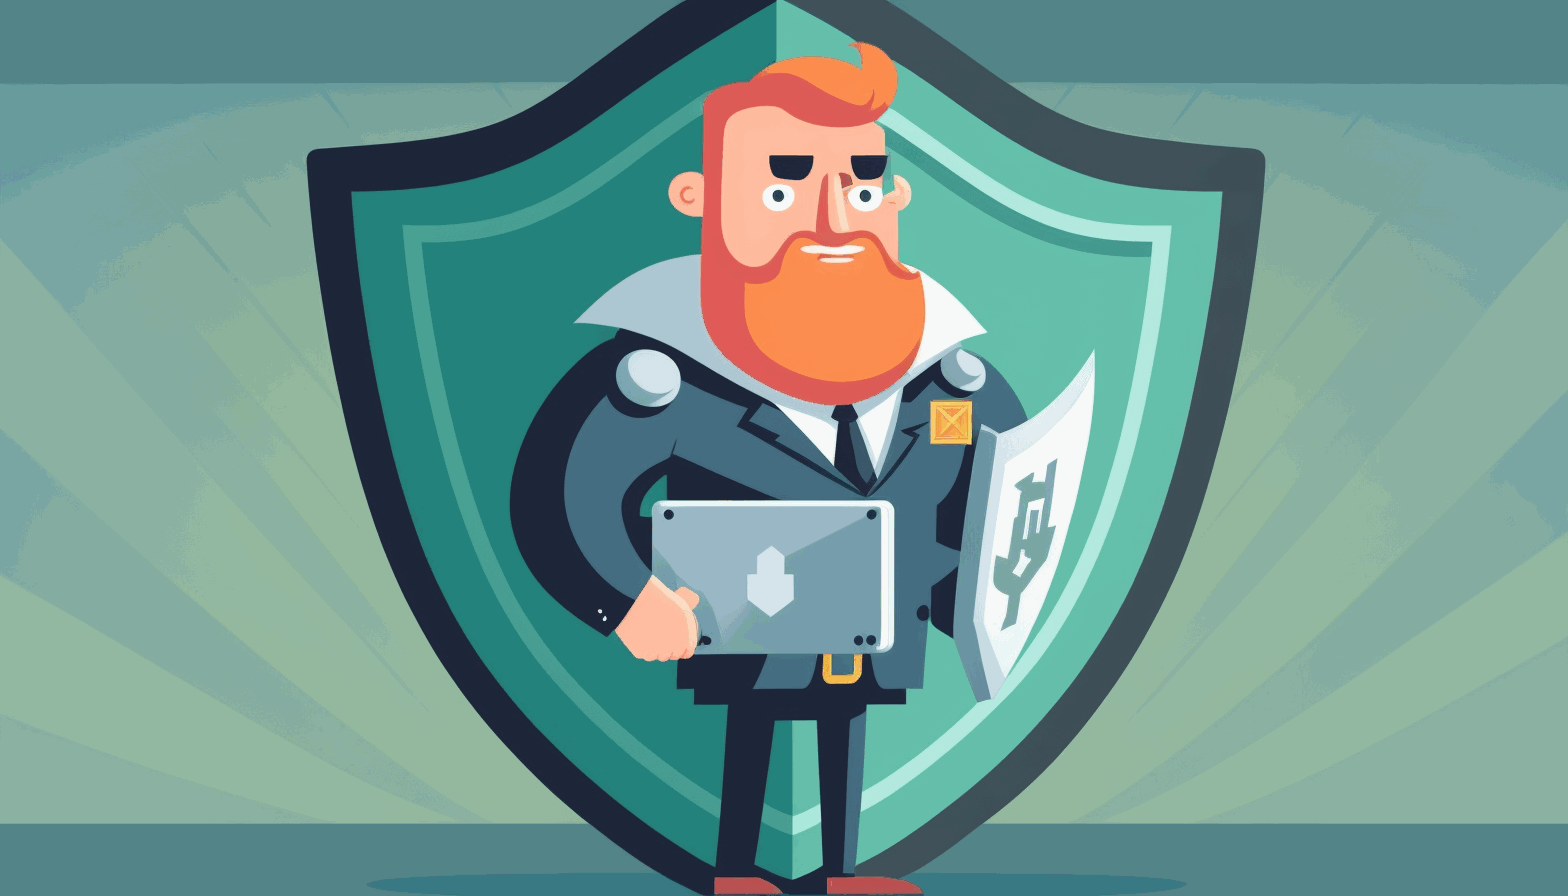 A cartoon developer standing confidently in front of a shield with a lock symbol while holding a laptop.